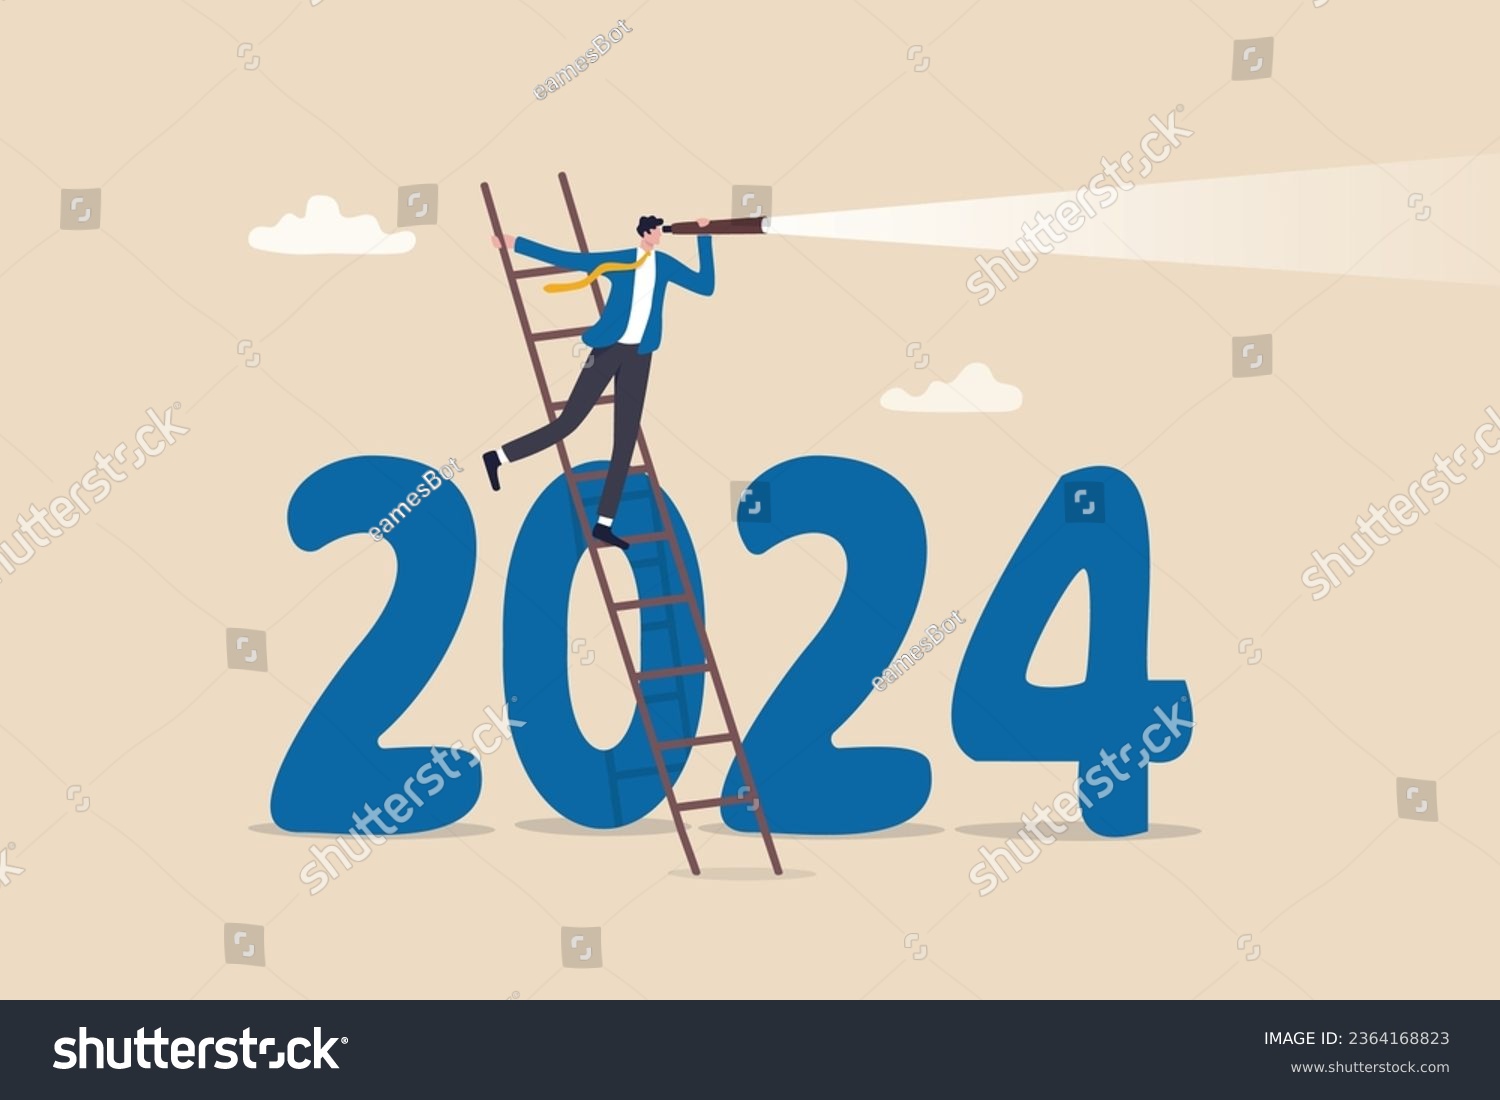 SVG of Year 2024 business outlook, forecast or plan ahead, vision for future success, new year goal or achievement, company target or hope concept, businessman climb up on year 2024 to see business outlook. svg